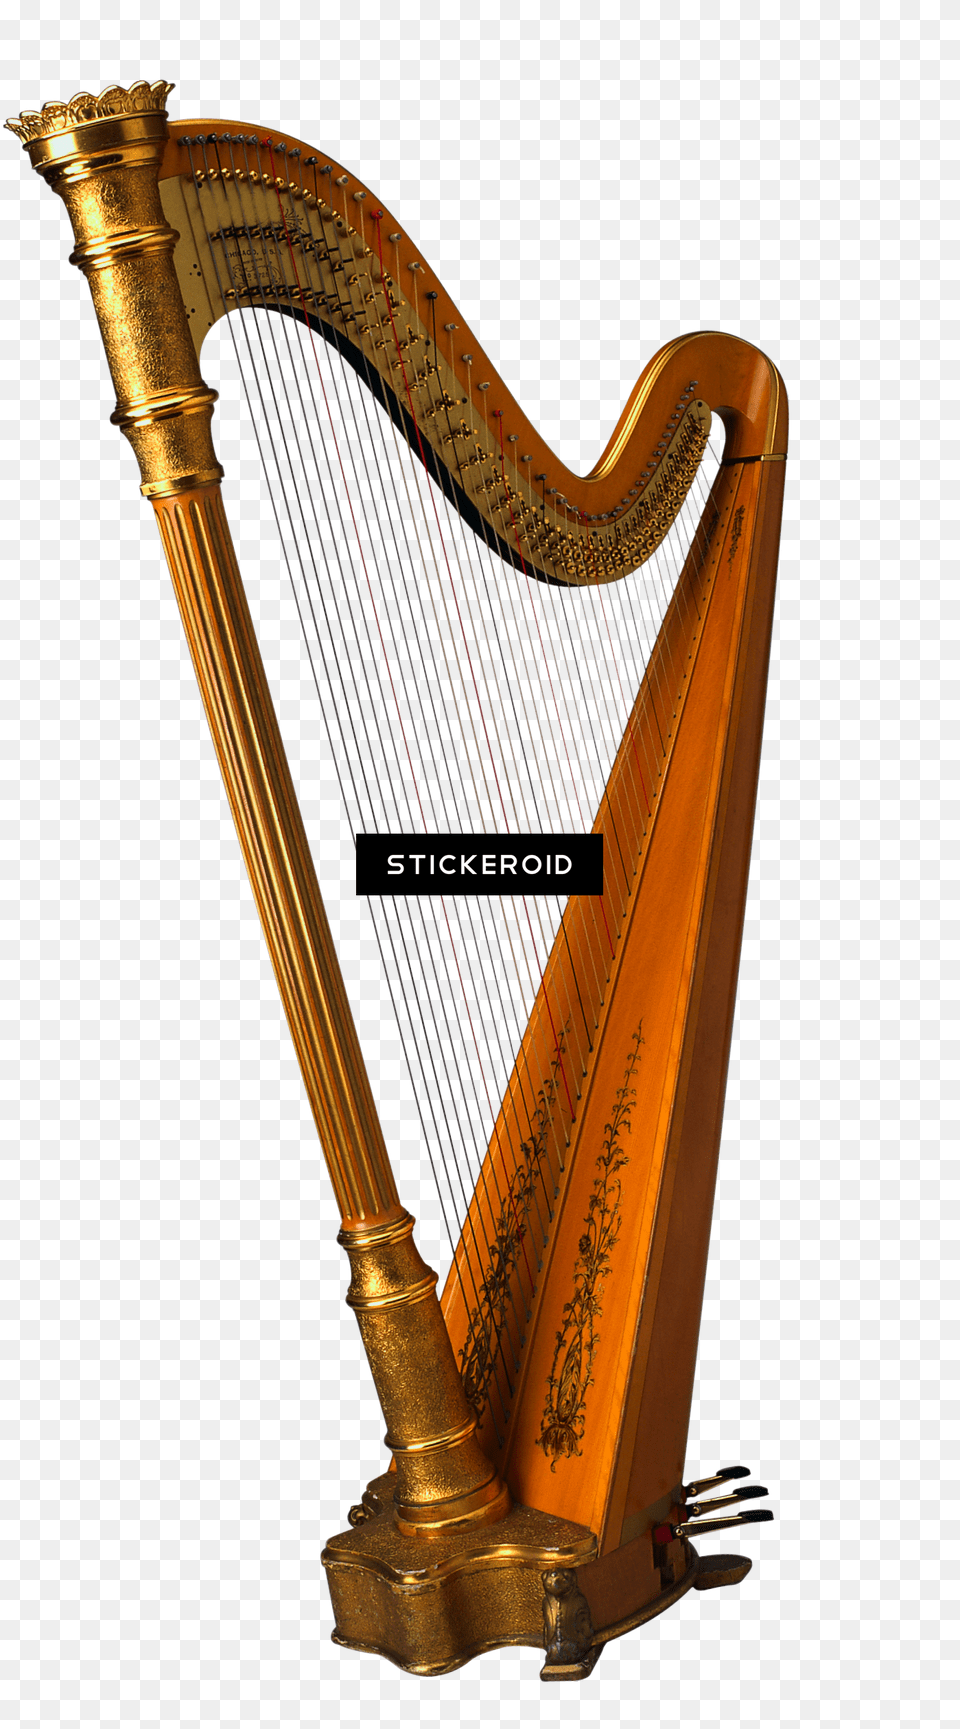 Traditional Chinese Musical Instruments Arfa Prozrachnij Fon, Musical Instrument, Harp Png Image